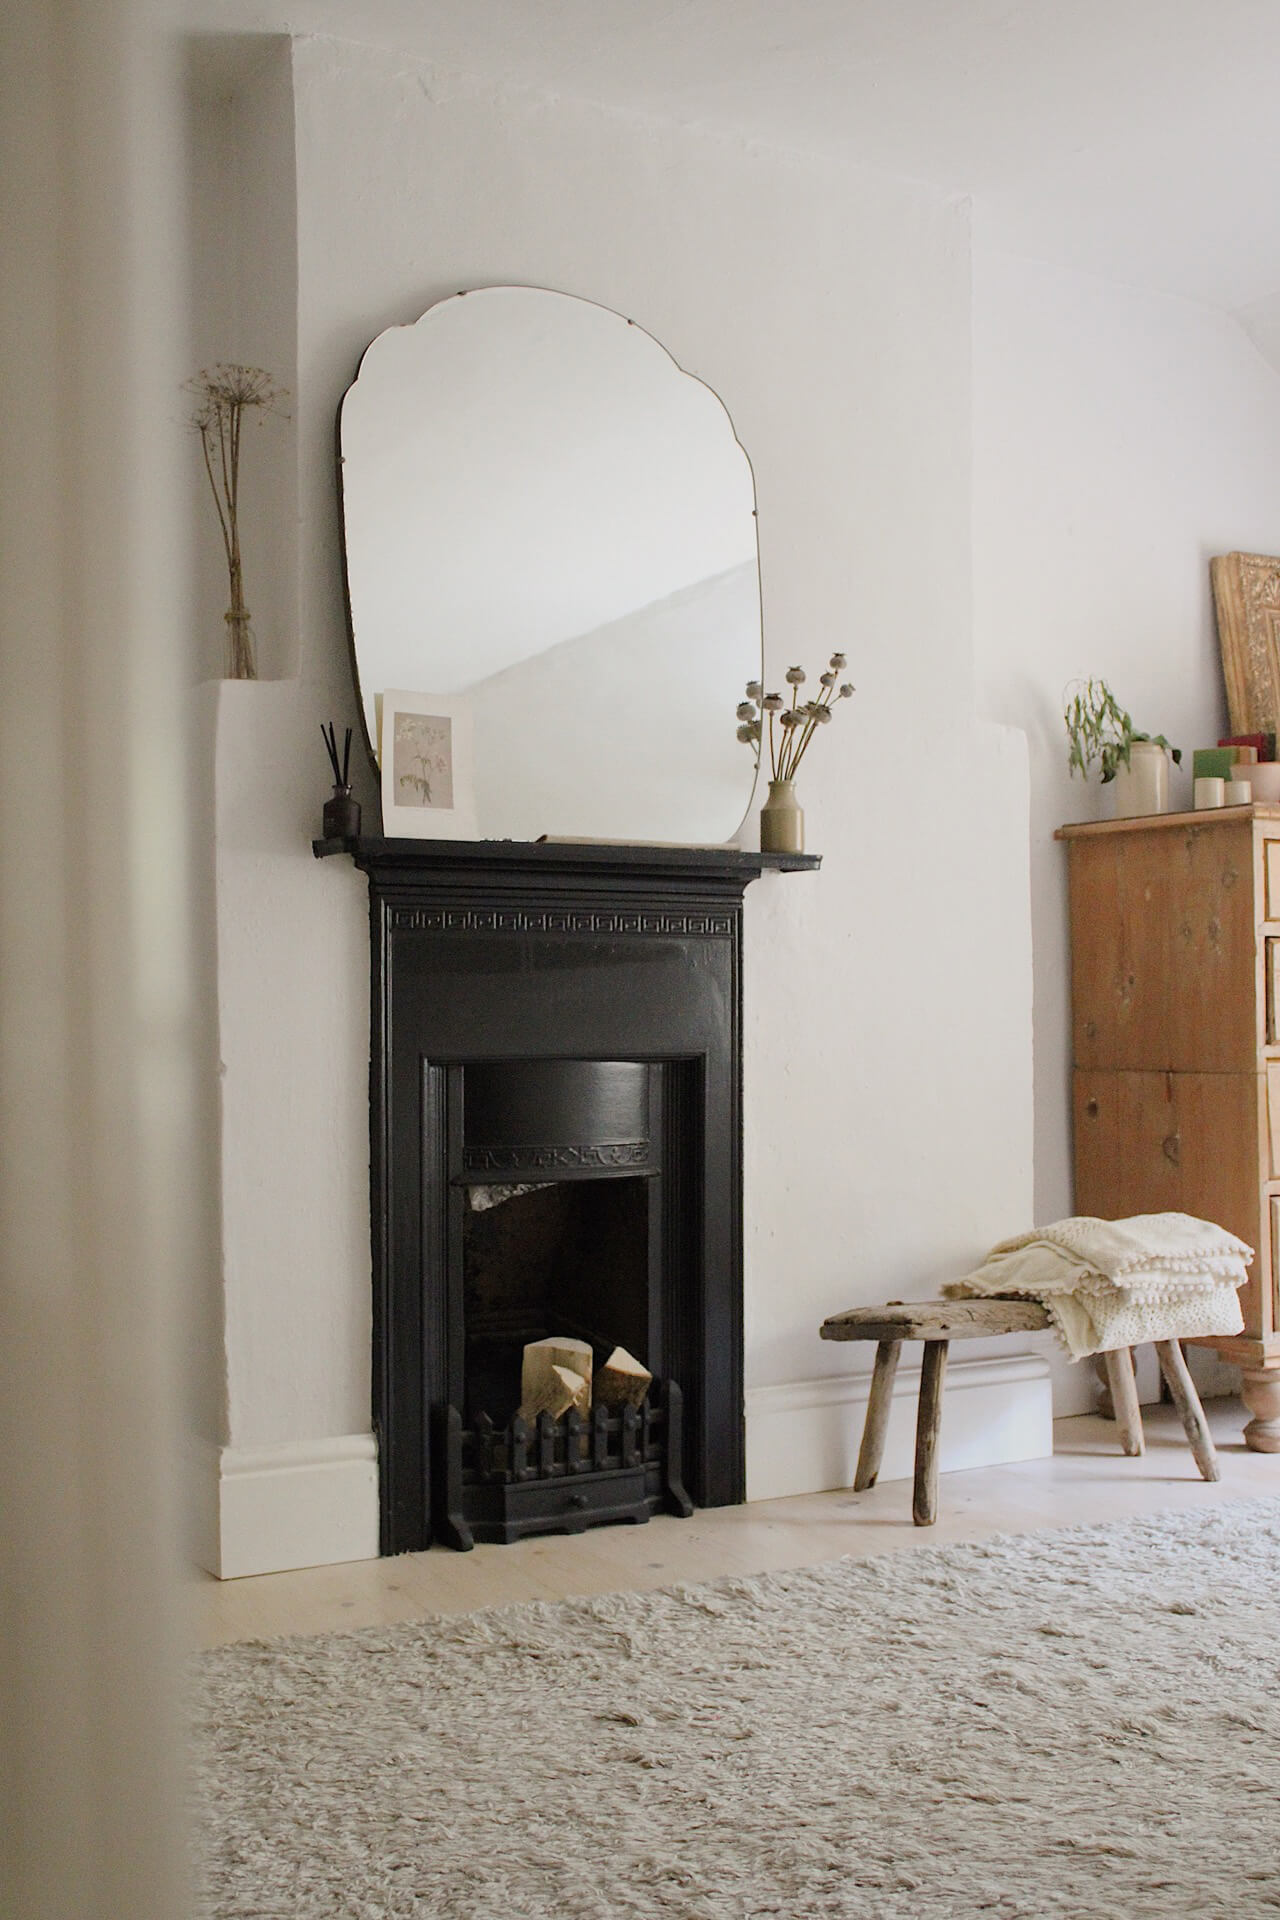 Home tour with Rachel Ashfield of @the_old_cottage - an old fireplace in a muted, calming bedroom